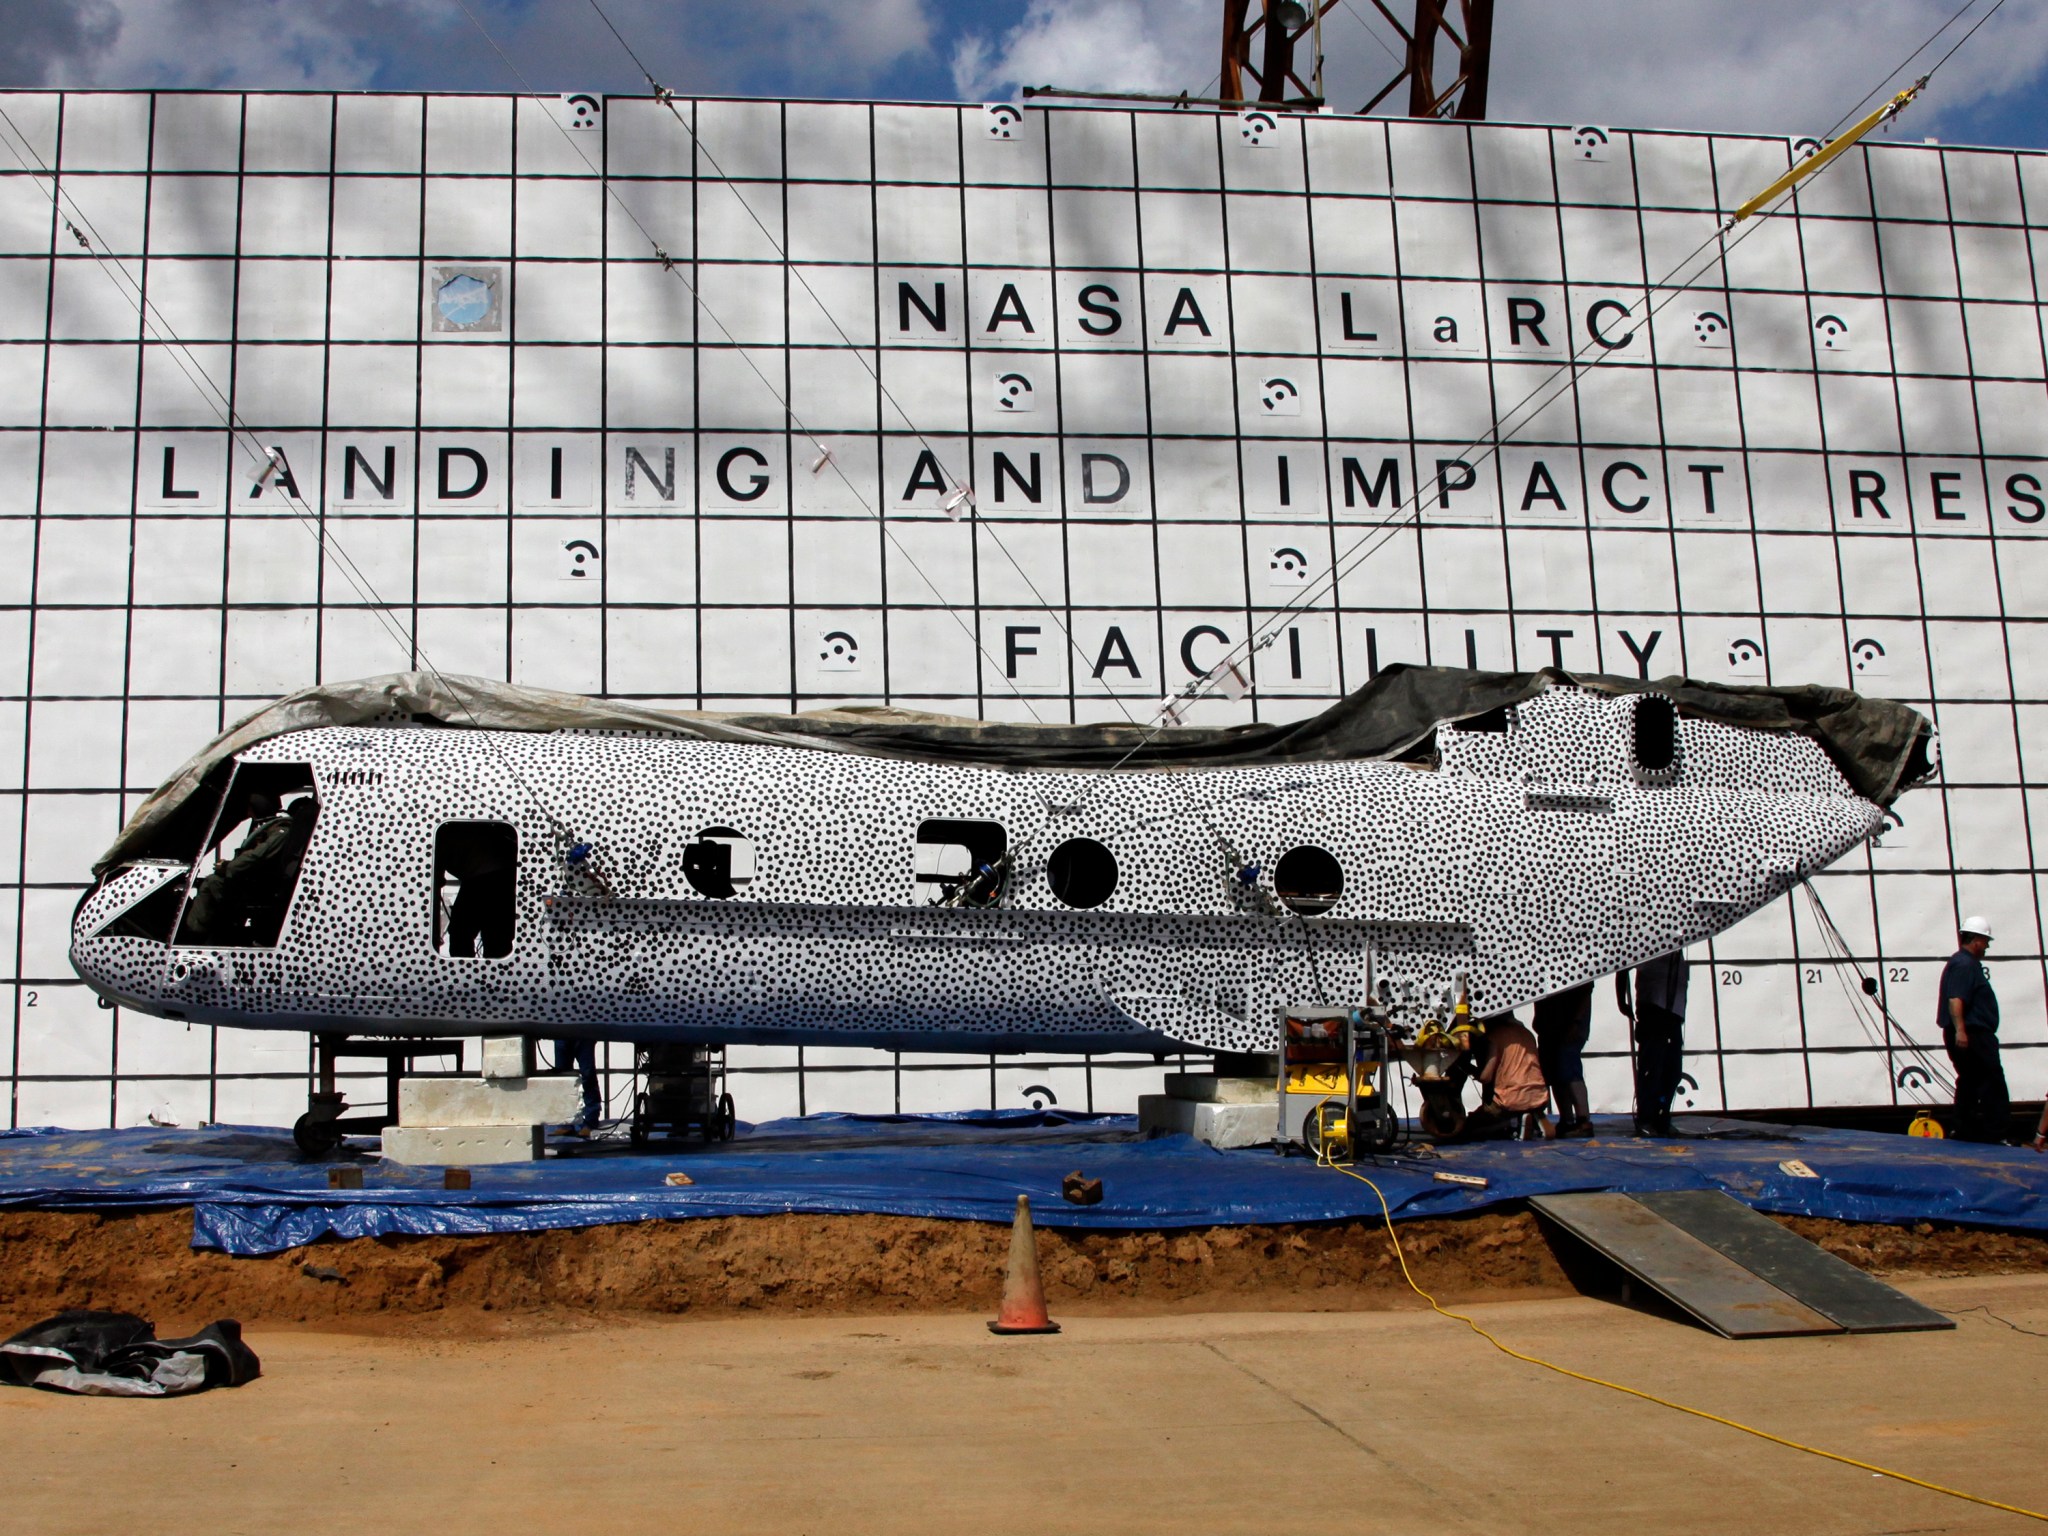 A black and white polka dot helicopter is getting prepared for a scheduled crash test.